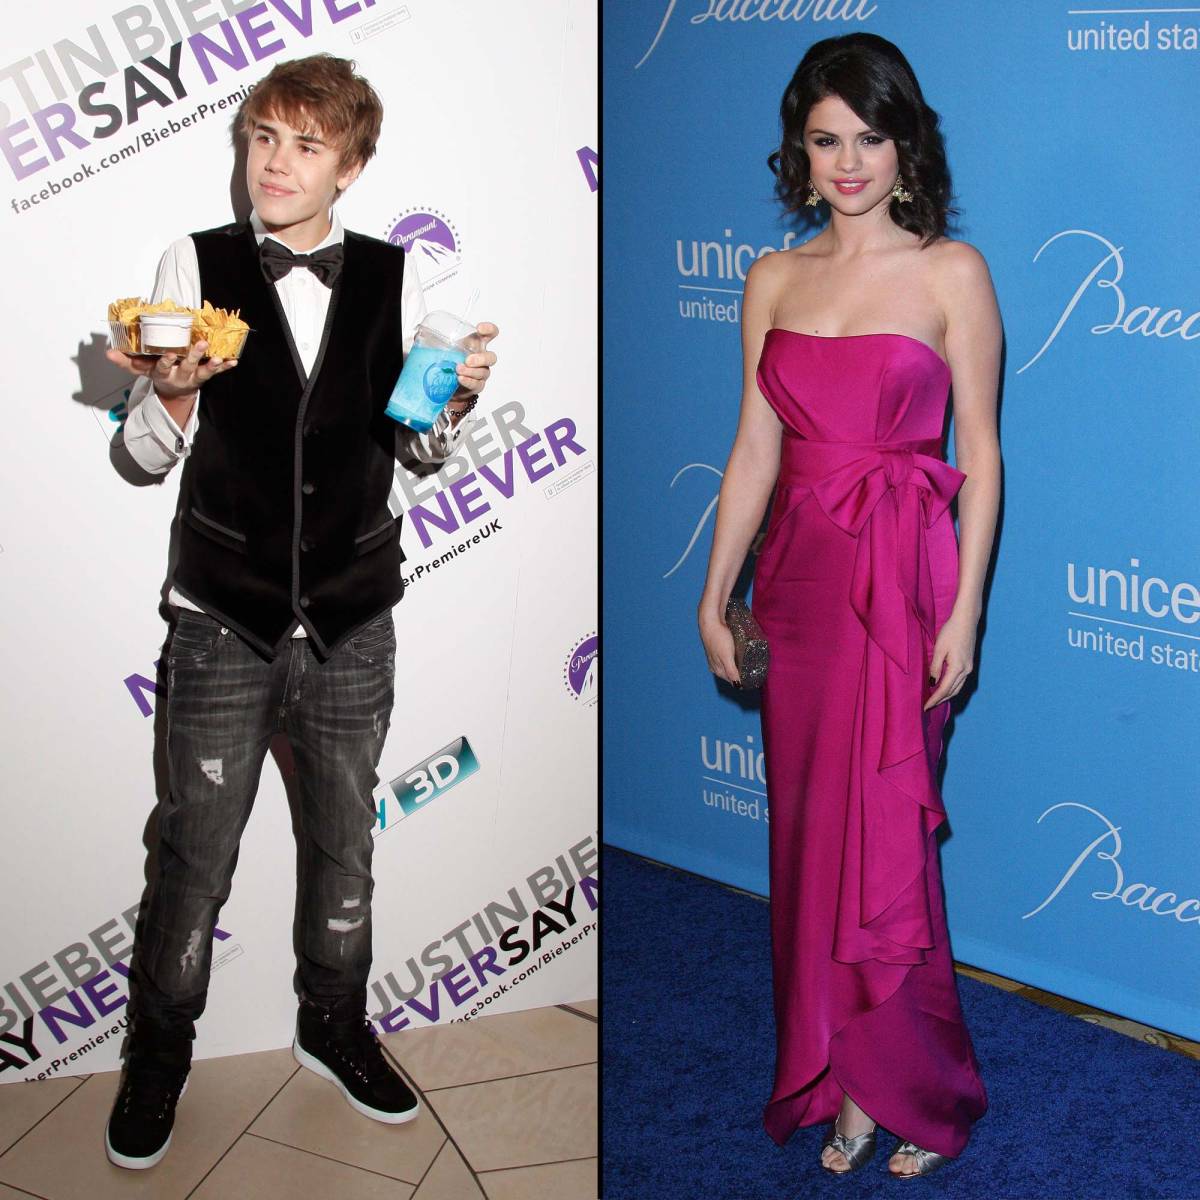 Justin Bieber Responds to Theory That He's in Love with Selena Gomez